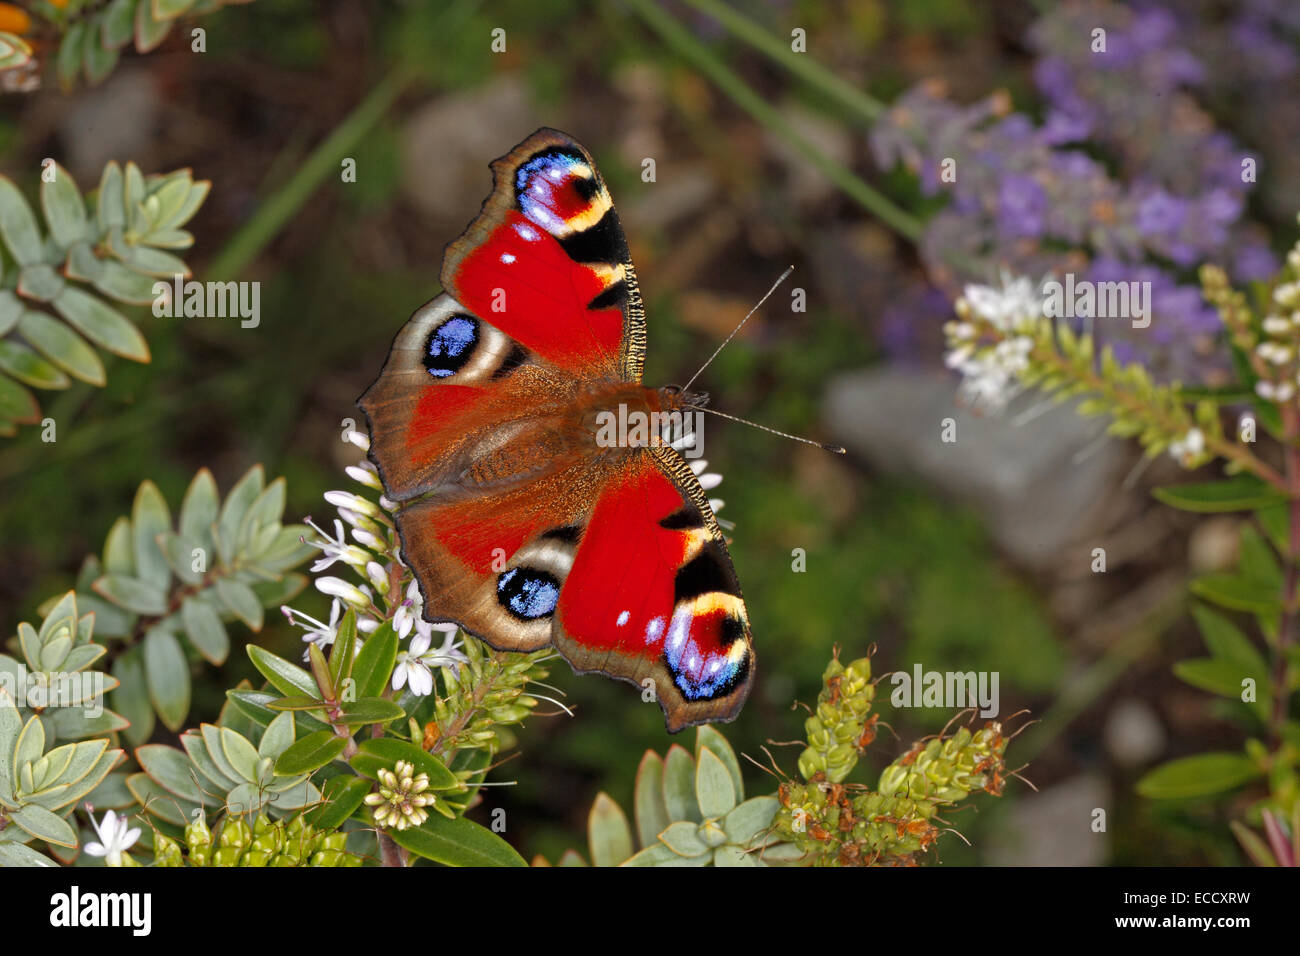 Peacock Butterfly (Aglais io) on Hebe flower in garden Cheshire UK August 2971 Stock Photo